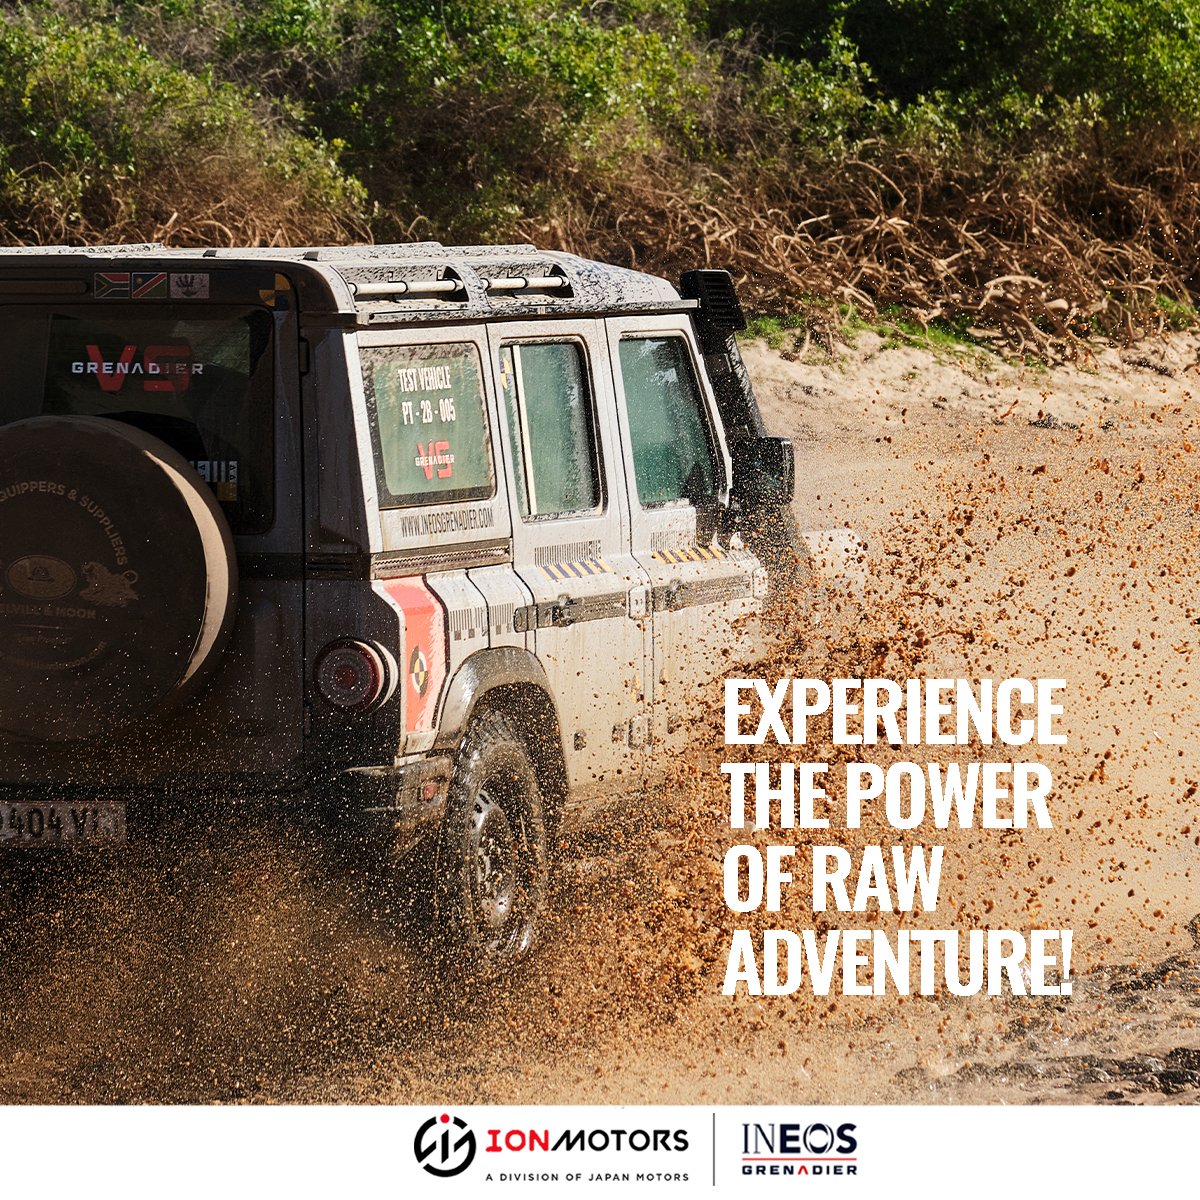 Ready to break free from the ordinary? The IneosGrenadier is your ticket to excitement off-road excitement.
Call us on +233243700735 to book a test drive.

Ion Motors, a division of Japan Motors
#IonMotors #Grenadier #INEOSGrenadier #BuiltOnPurpose #4X4 #offroading #Grenadier4X4